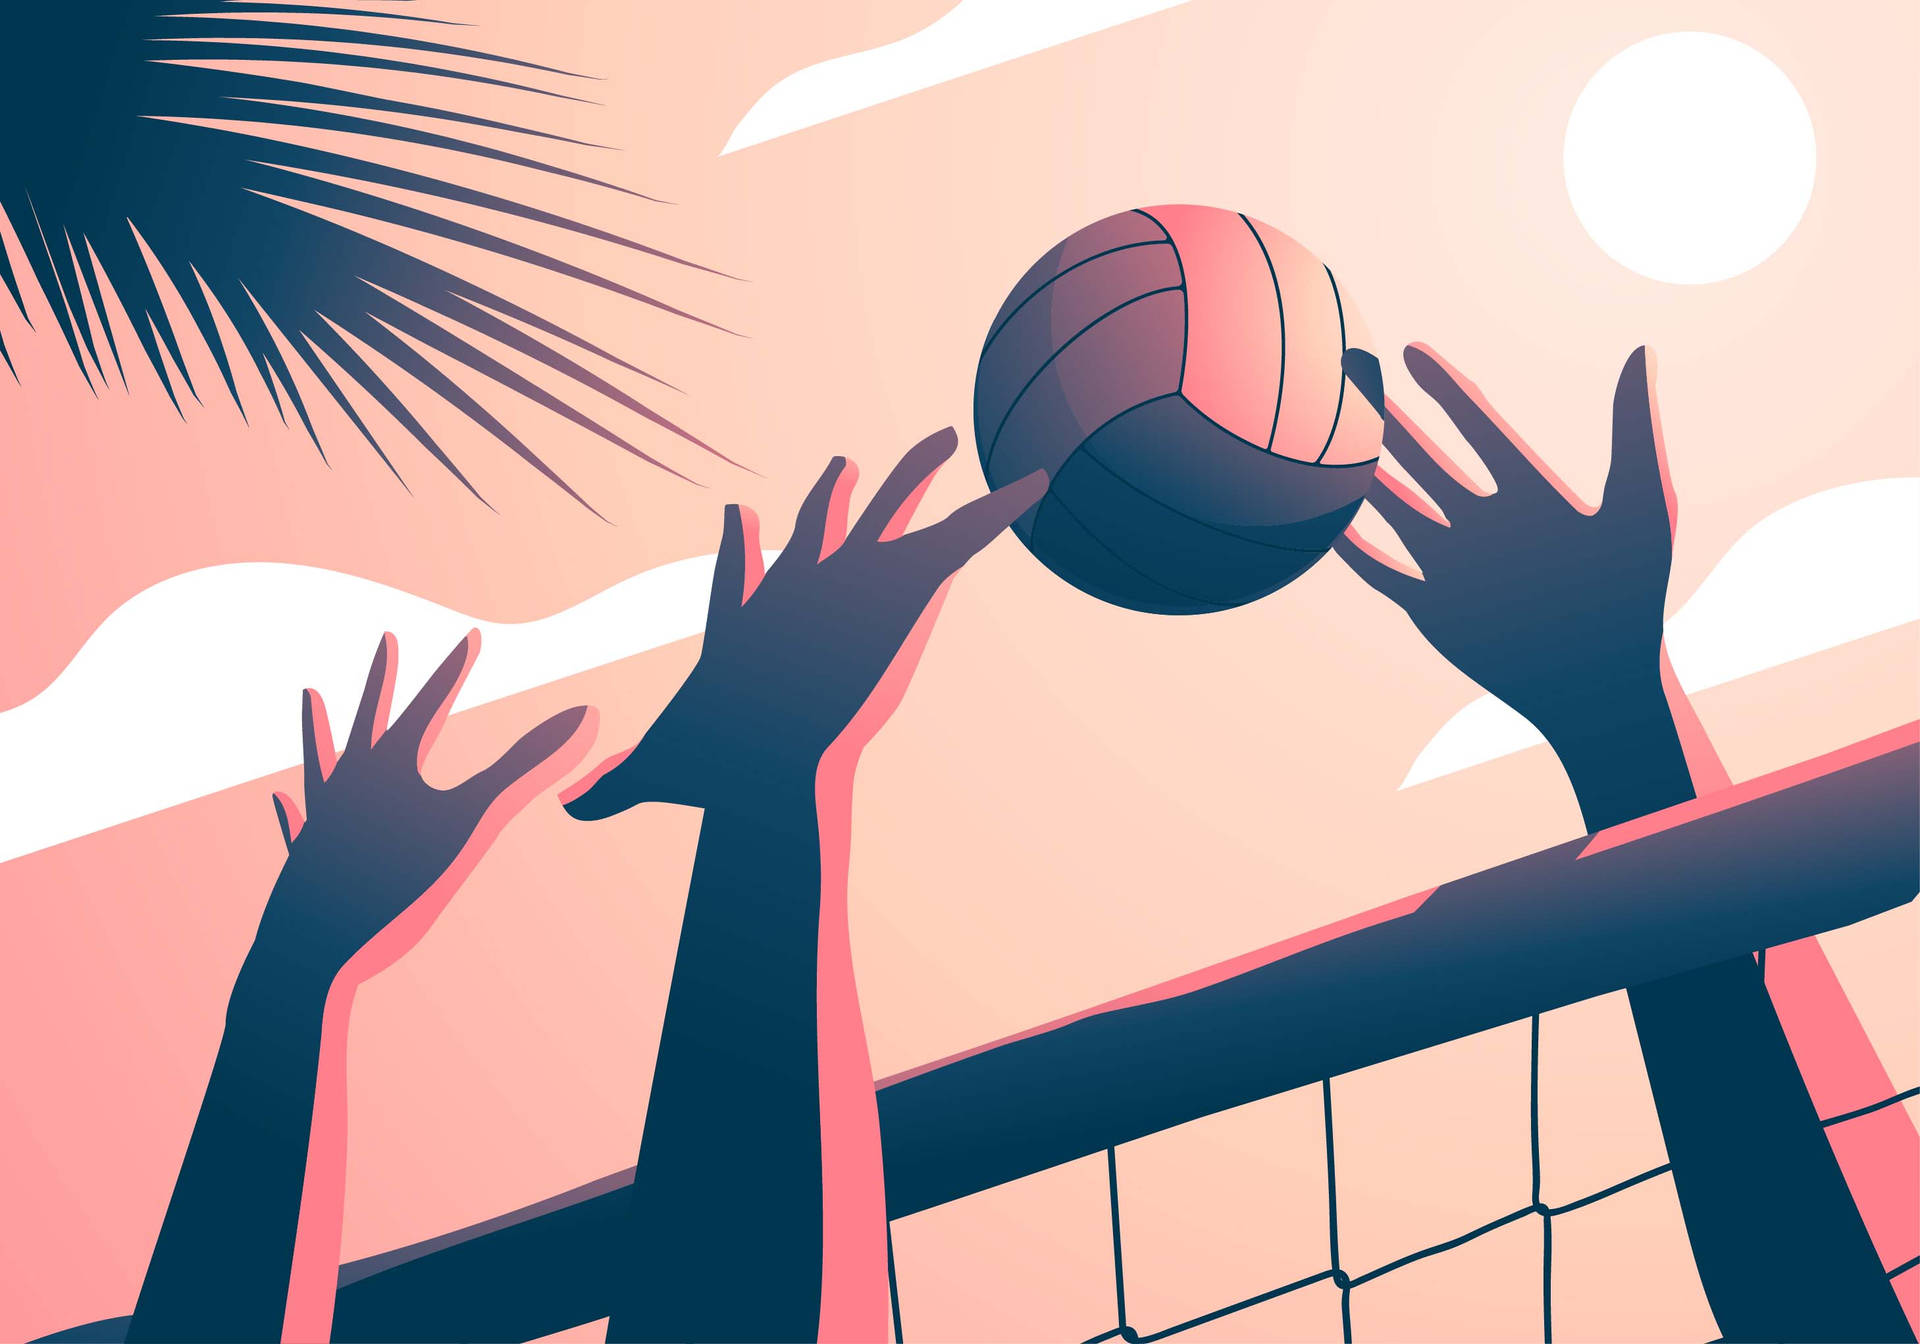 Background Volleyball Wallpaper Discover more Logo Match Organized  Players Team Sport wallpaper htt  Volleyball wallpaper Volleyball  backgrounds Volleyball